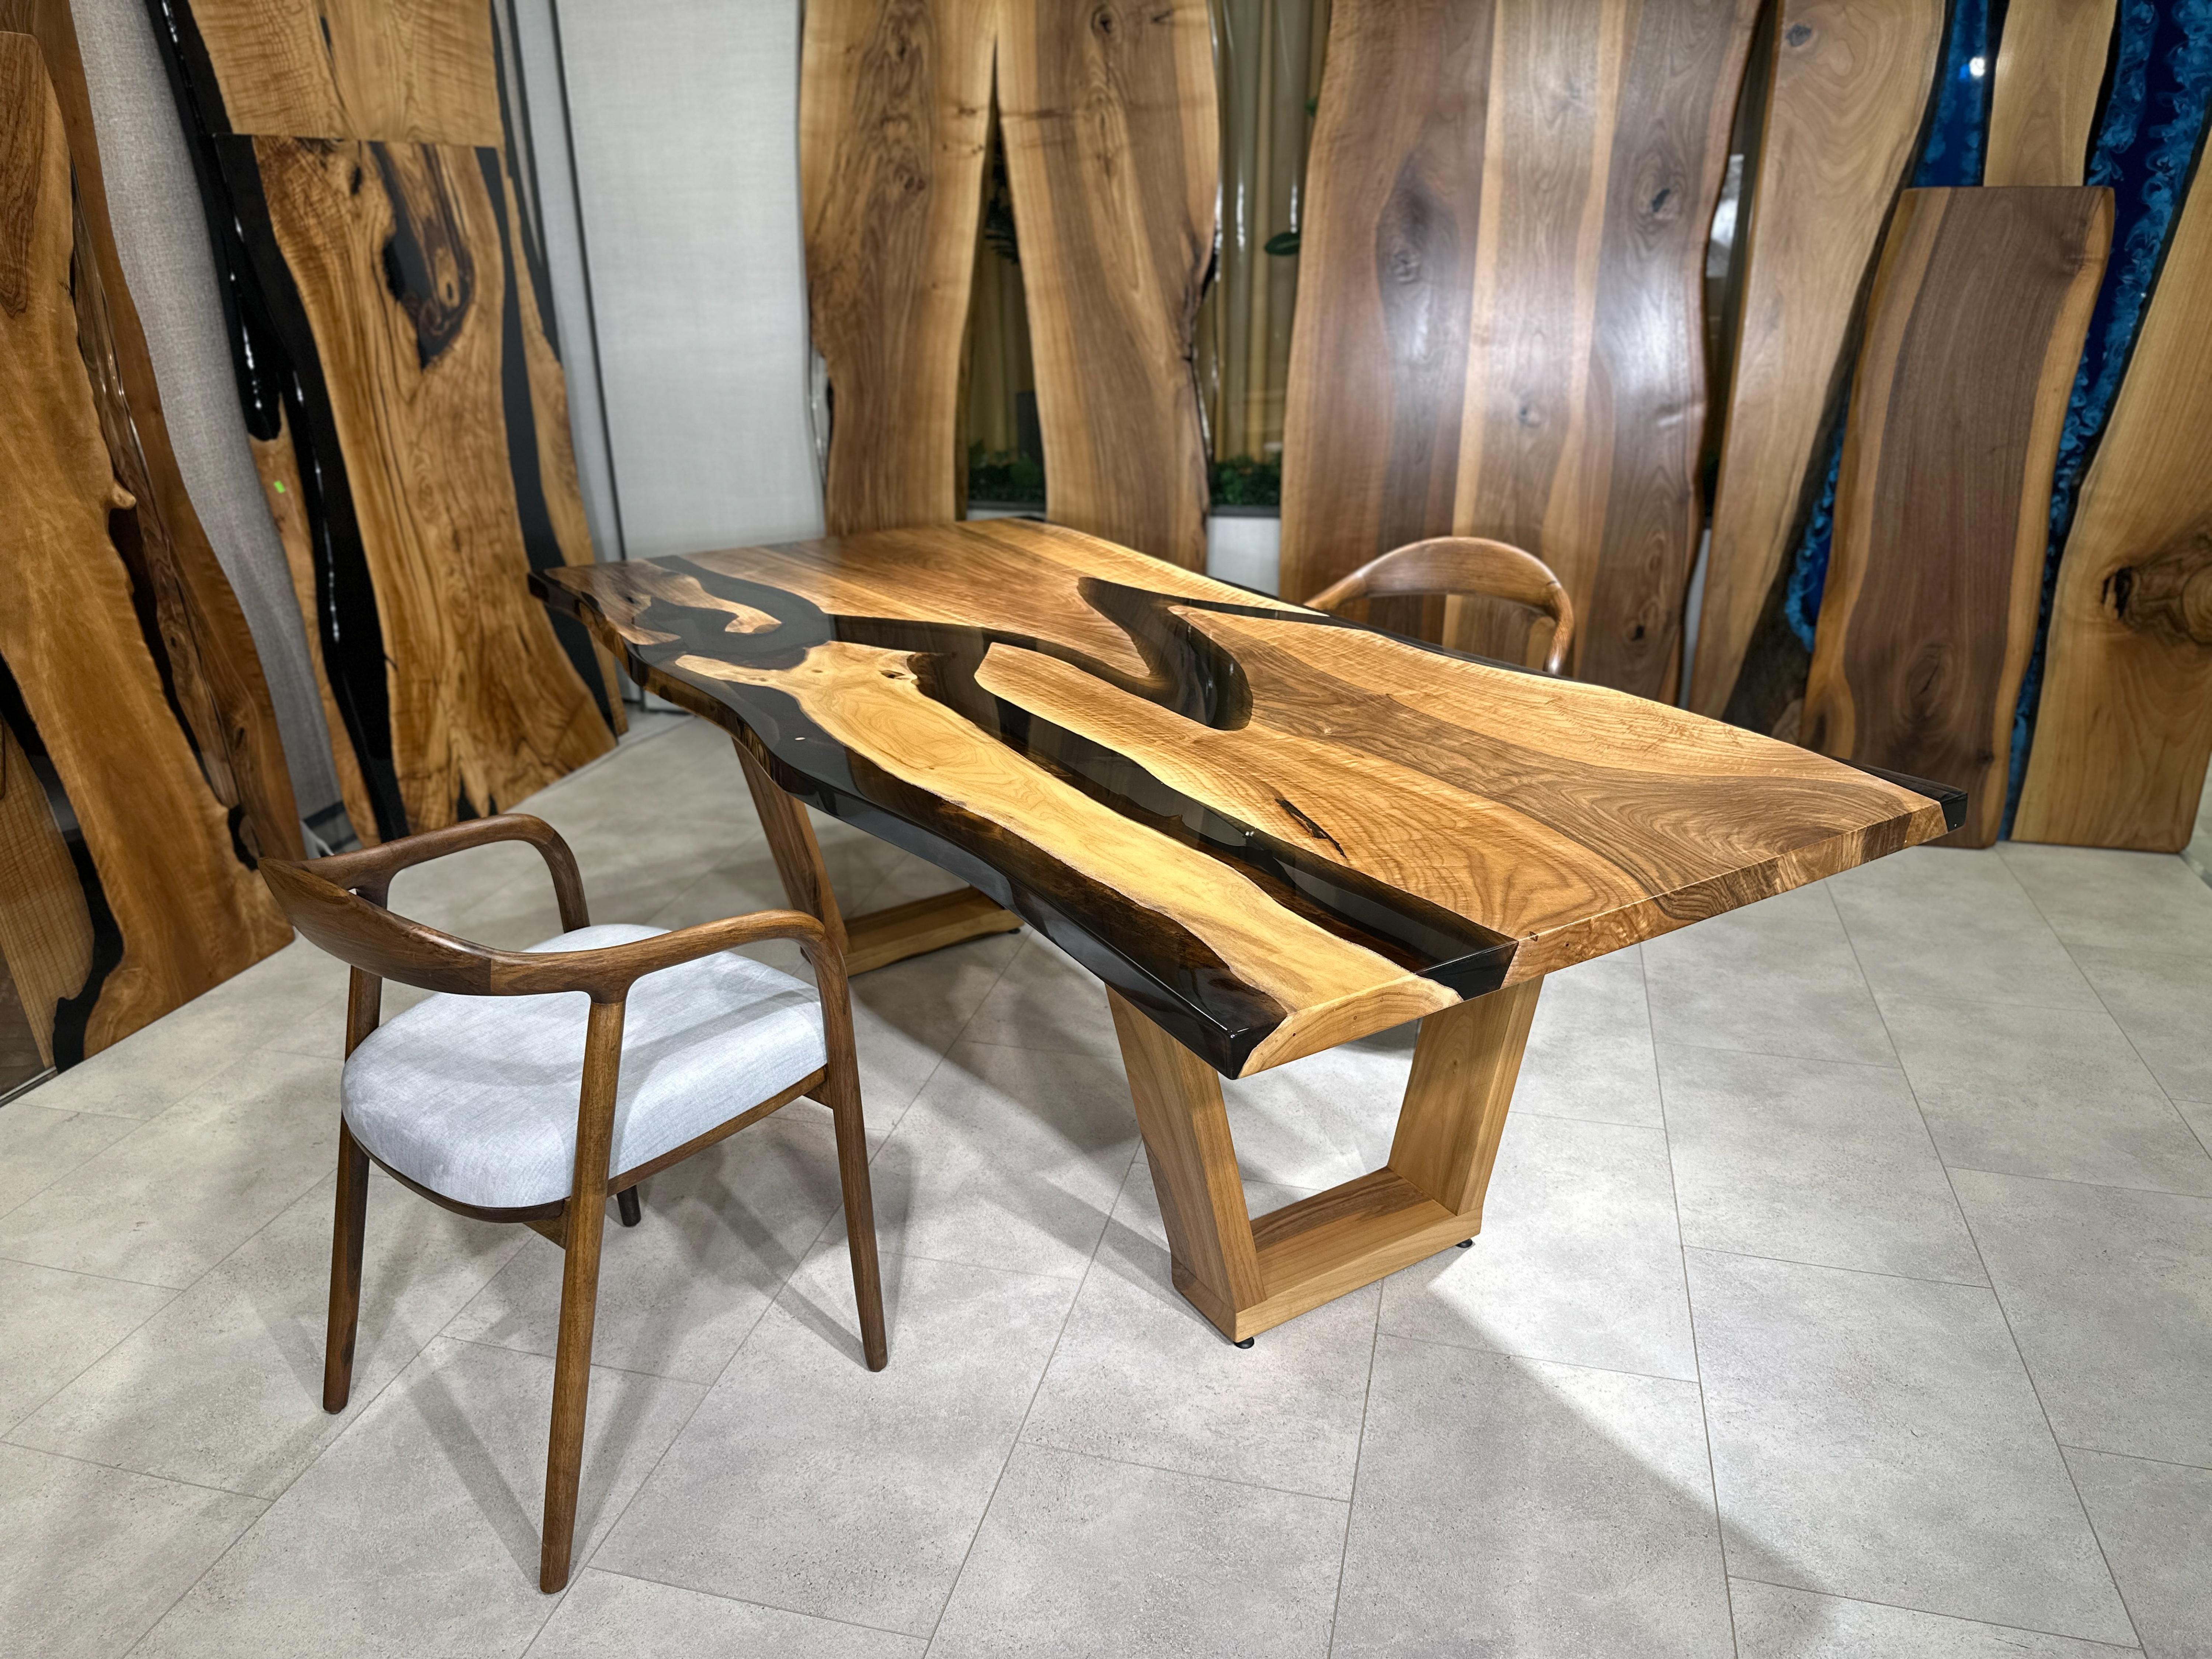 Black Transparent Epoxy Resin Walnut Table

This table is made of walnut wood & black transparent epoxy. 

Custom sizes, colours and finishes are available!